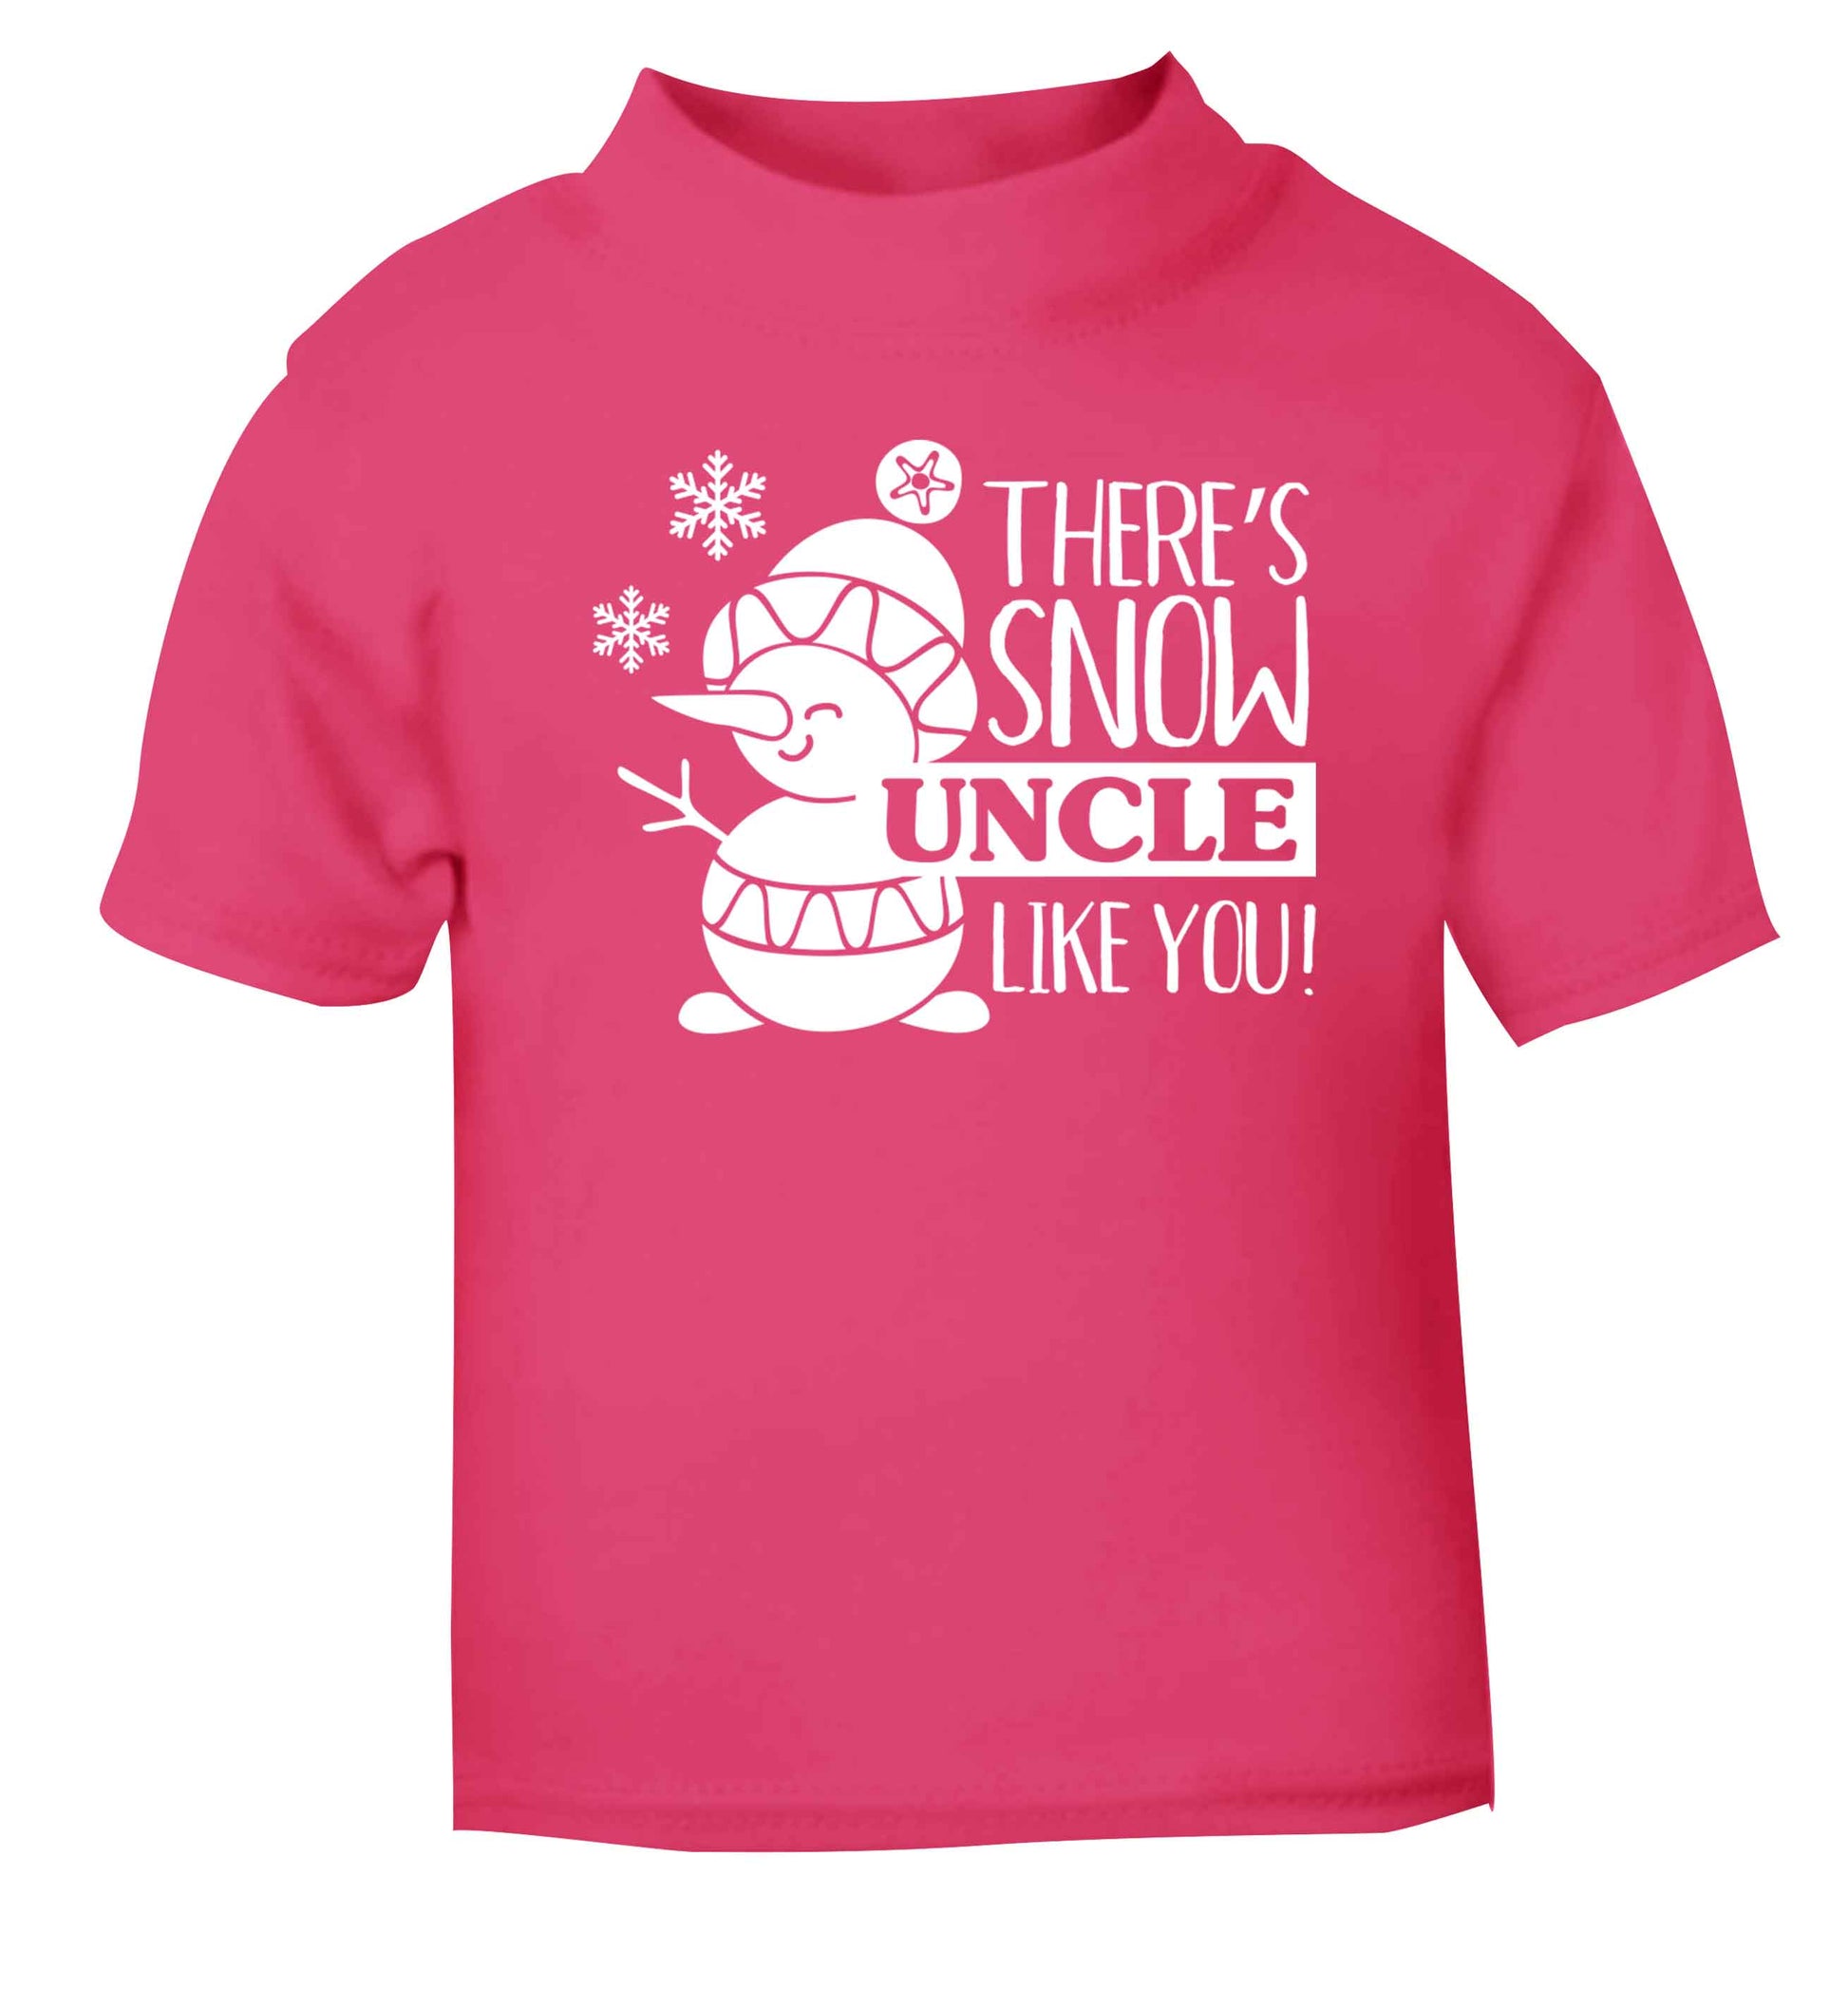 There's snow uncle like you pink baby toddler Tshirt 2 Years